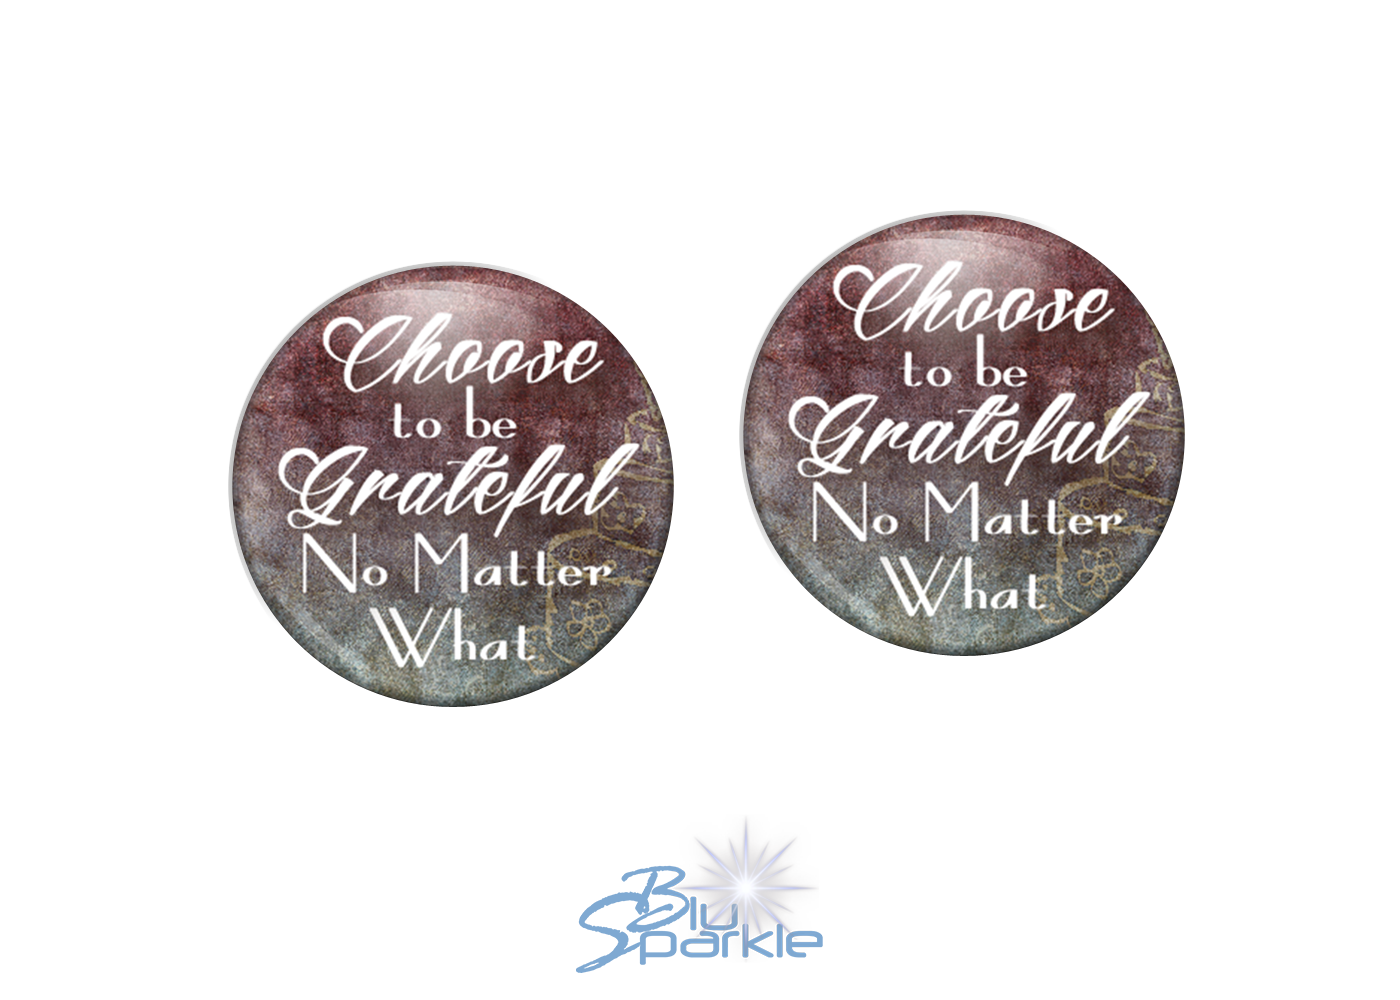 Choose To Be Grateful No Matter What - Earrings